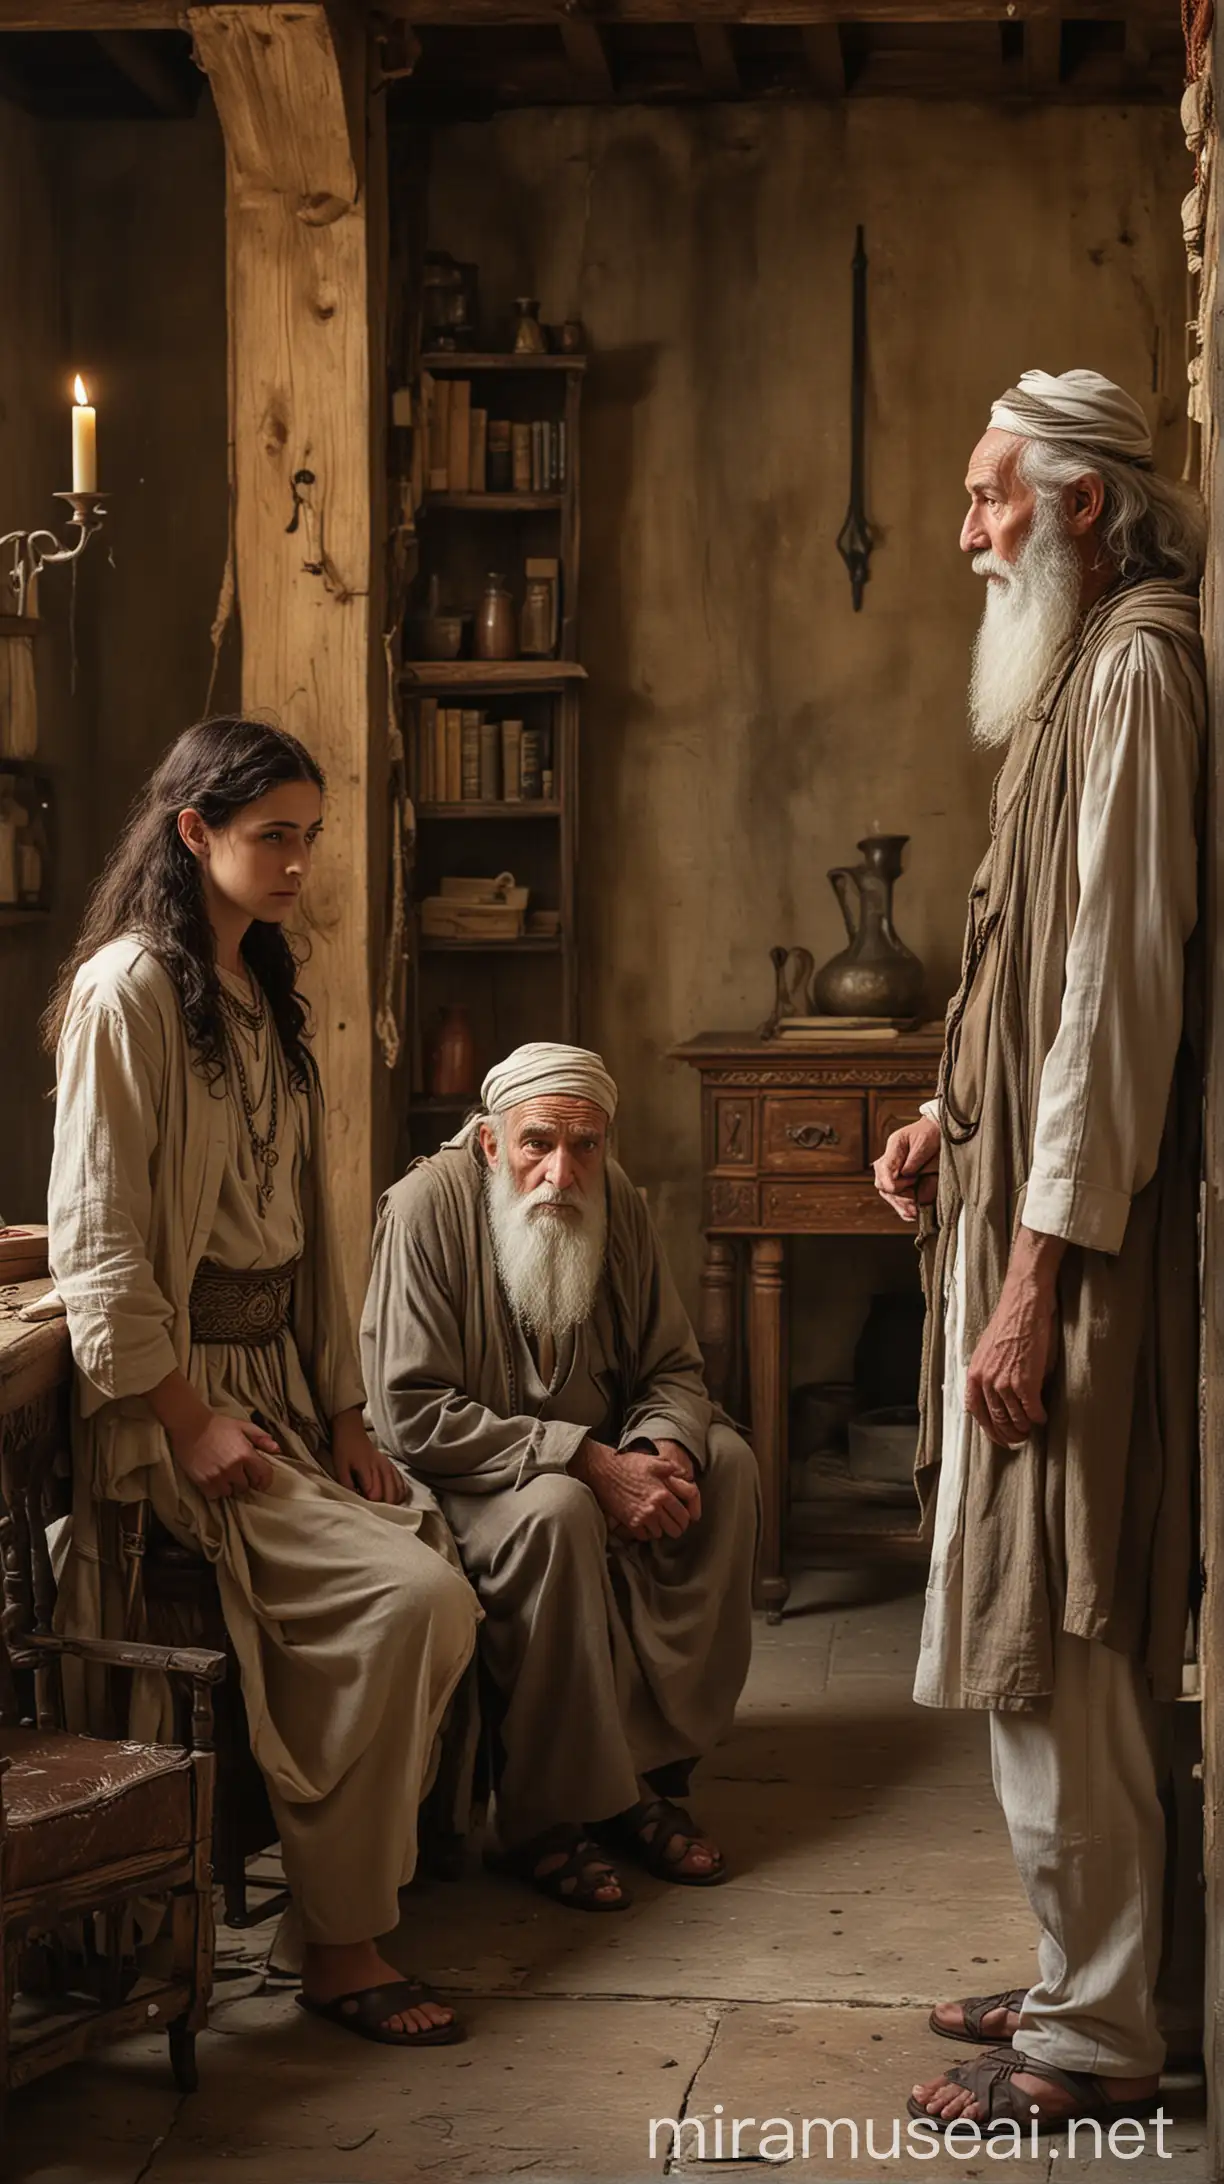 Ancient Jewish Men in Serious Conversation with Lady Tamar in Rustic Setting